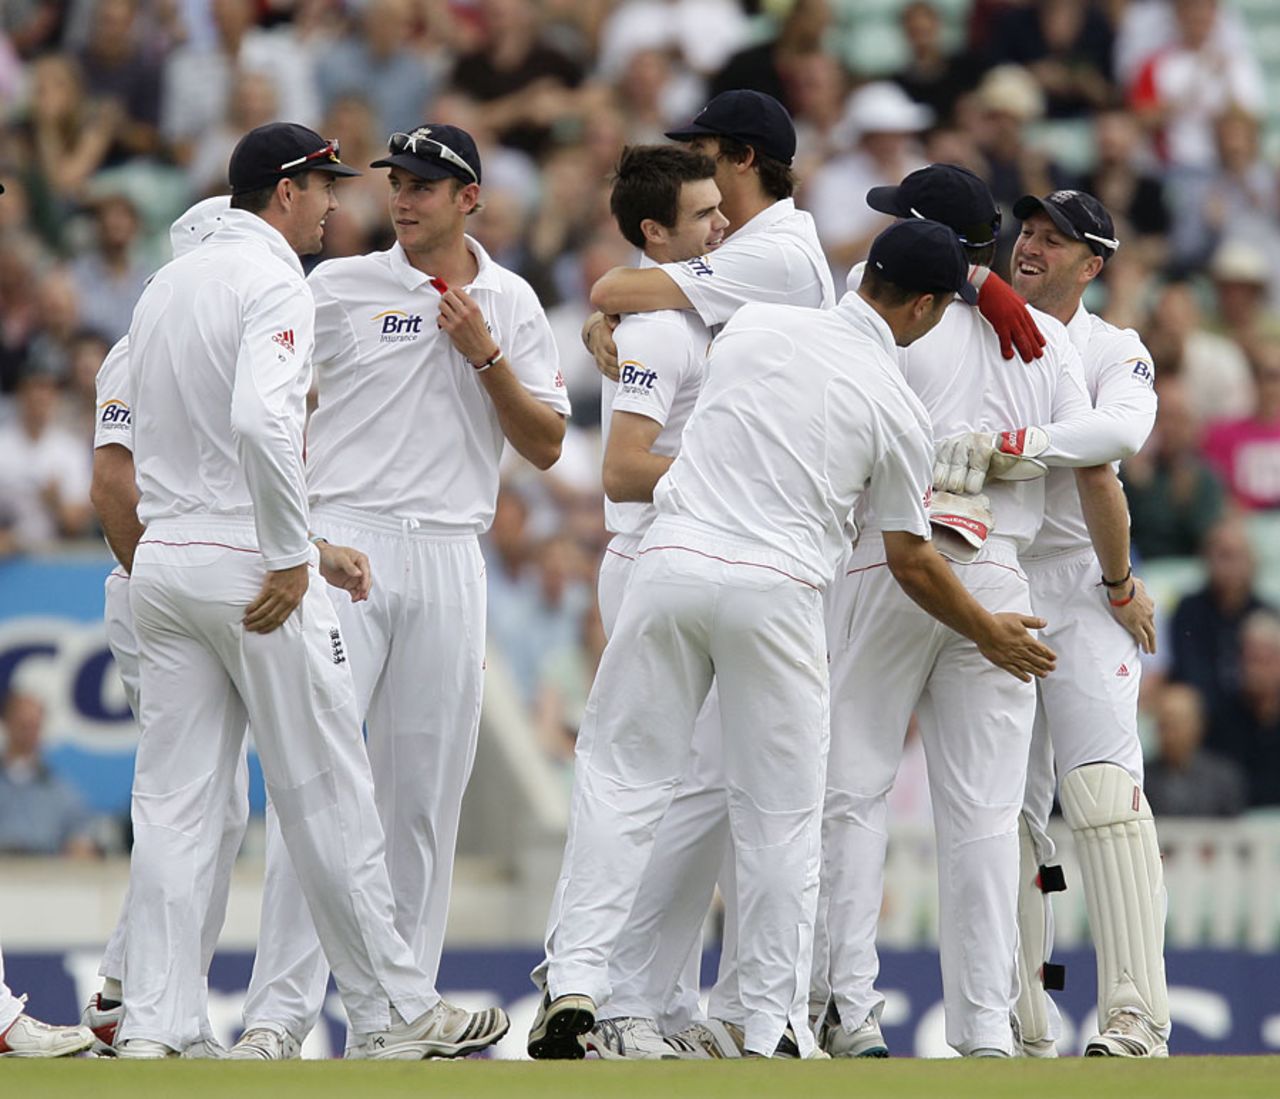 James Anderson gave England some hope when he removed Yasir Hameed for a duck, England v Pakistan, 3rd Test, The Oval, August 21, 2010